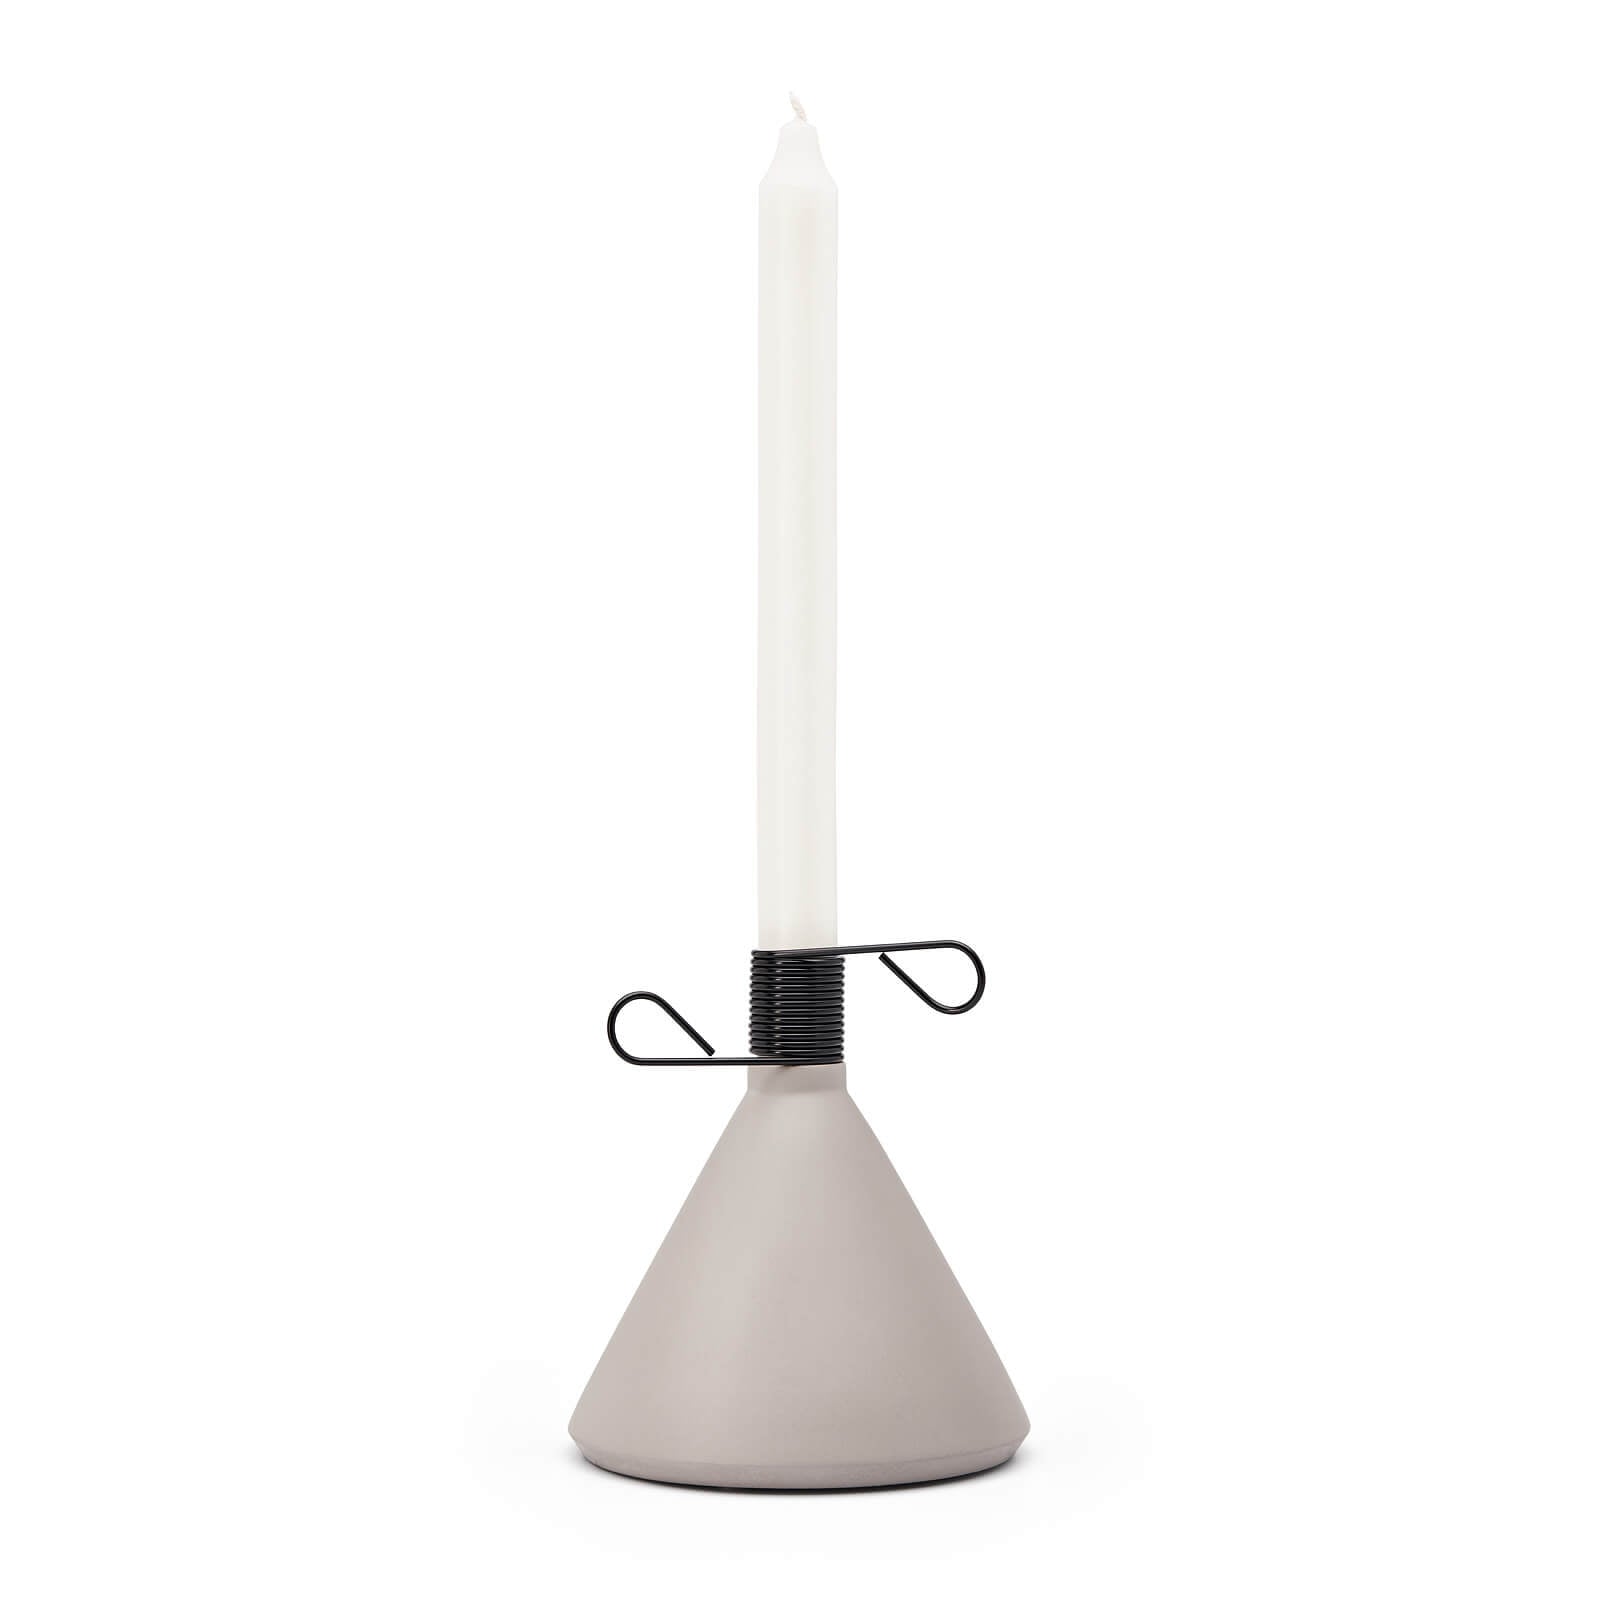 Conic Candle Holder